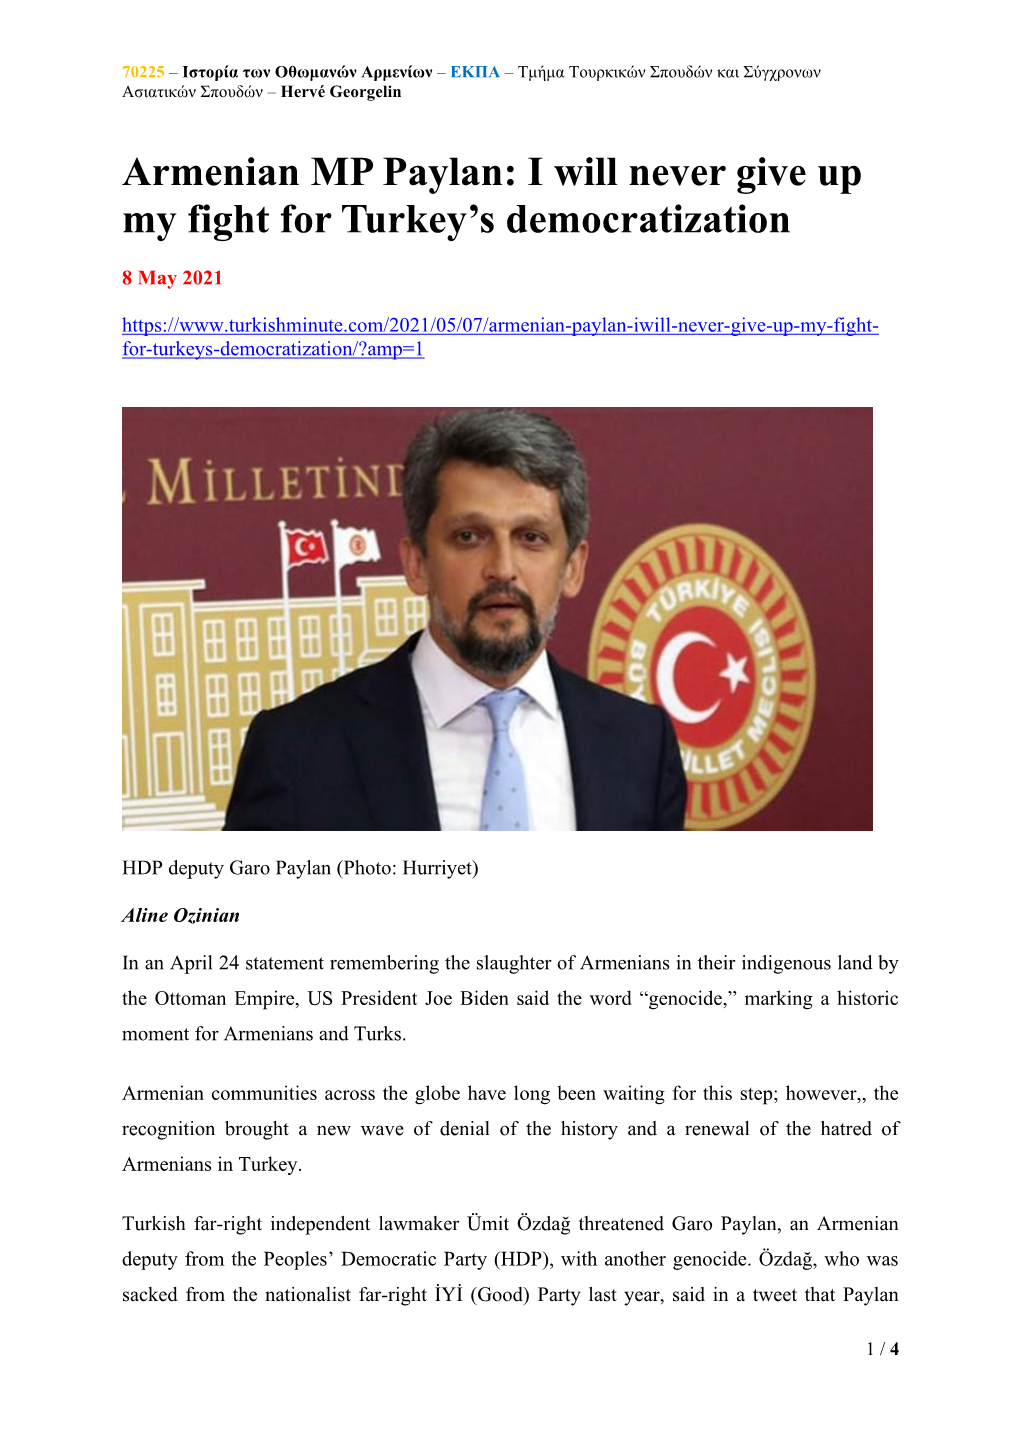 Armenian MP Paylan: I Will Never Give up My Fight for Turkey's